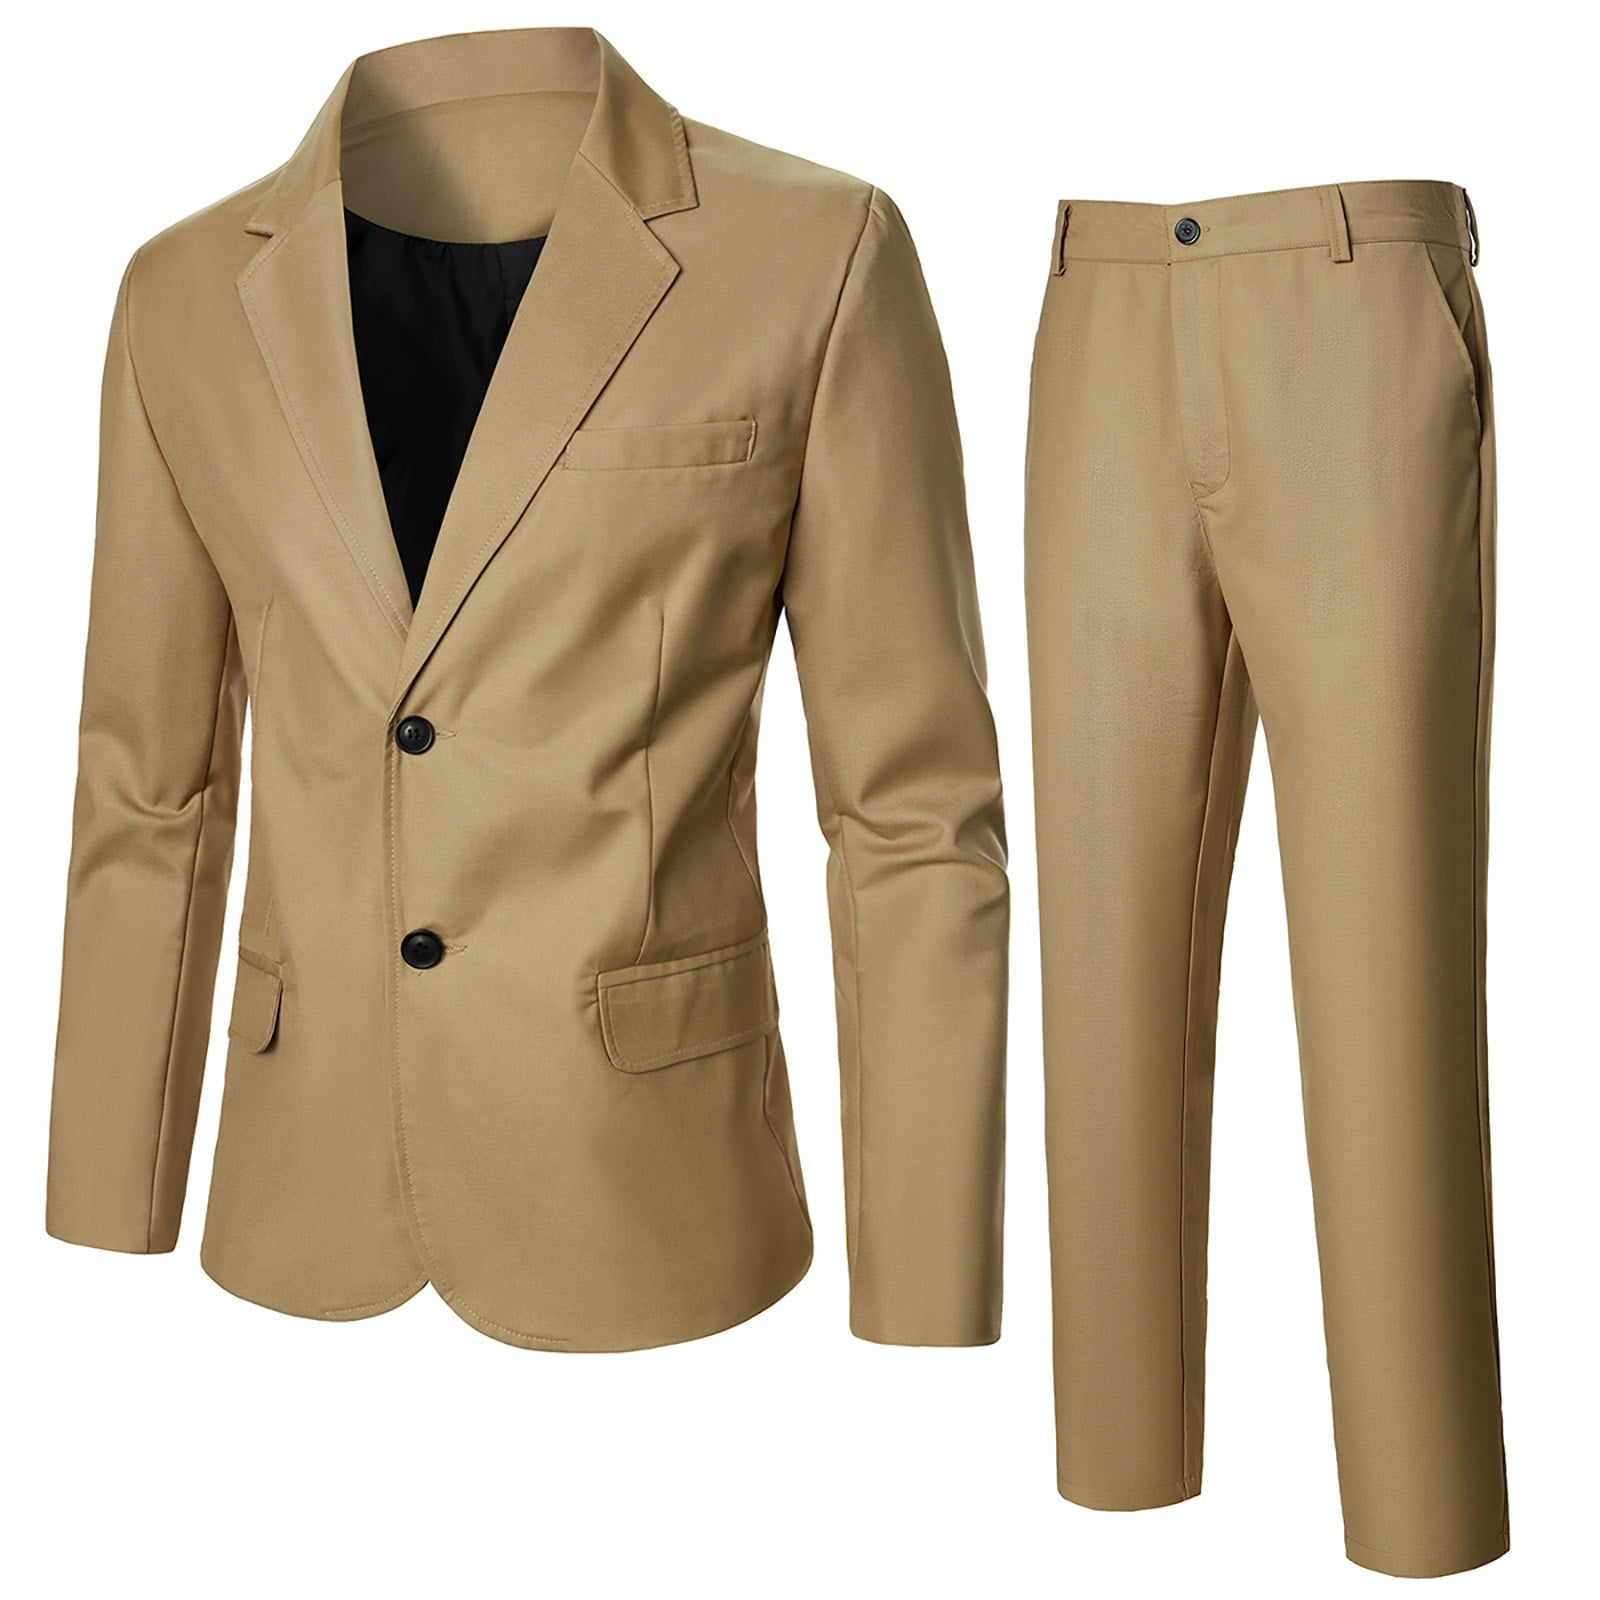 Khaki Suits For Men Mens Business Formal Wedding Prom Graduation Casual  Stretch Slim Fit Classic Fit Tuxedo Blazer And Pants Two Piece